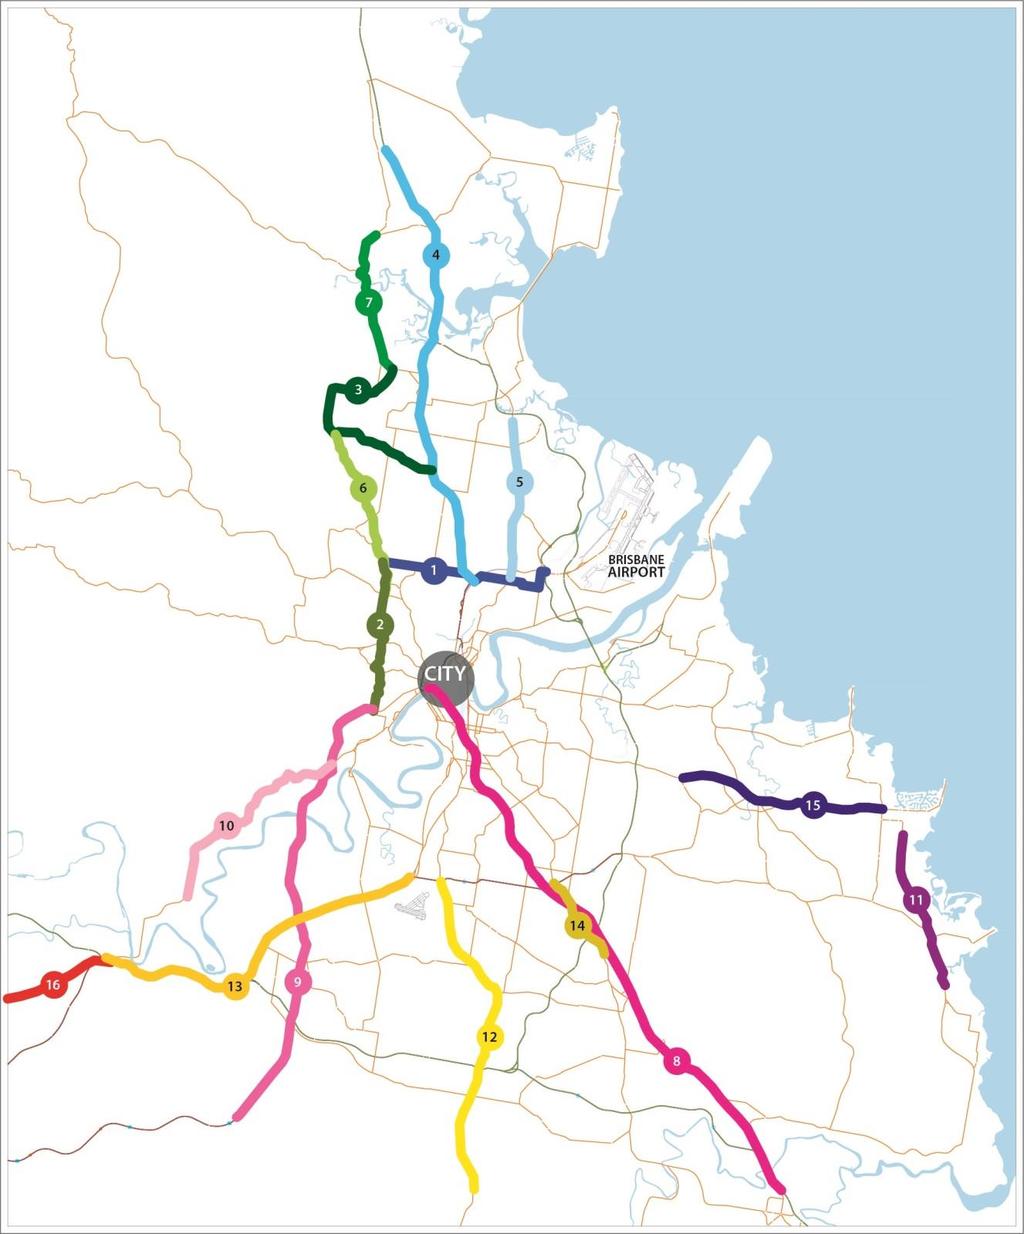 STATE GOVERNMENT MAJOR TRANSPORT CORRIDORS BRISBANE Route Corridor Name Start (intersection) End (intersection) Length (km) 1 East West Arterial / Stafford Rd East-West Arterial and Southern Cross